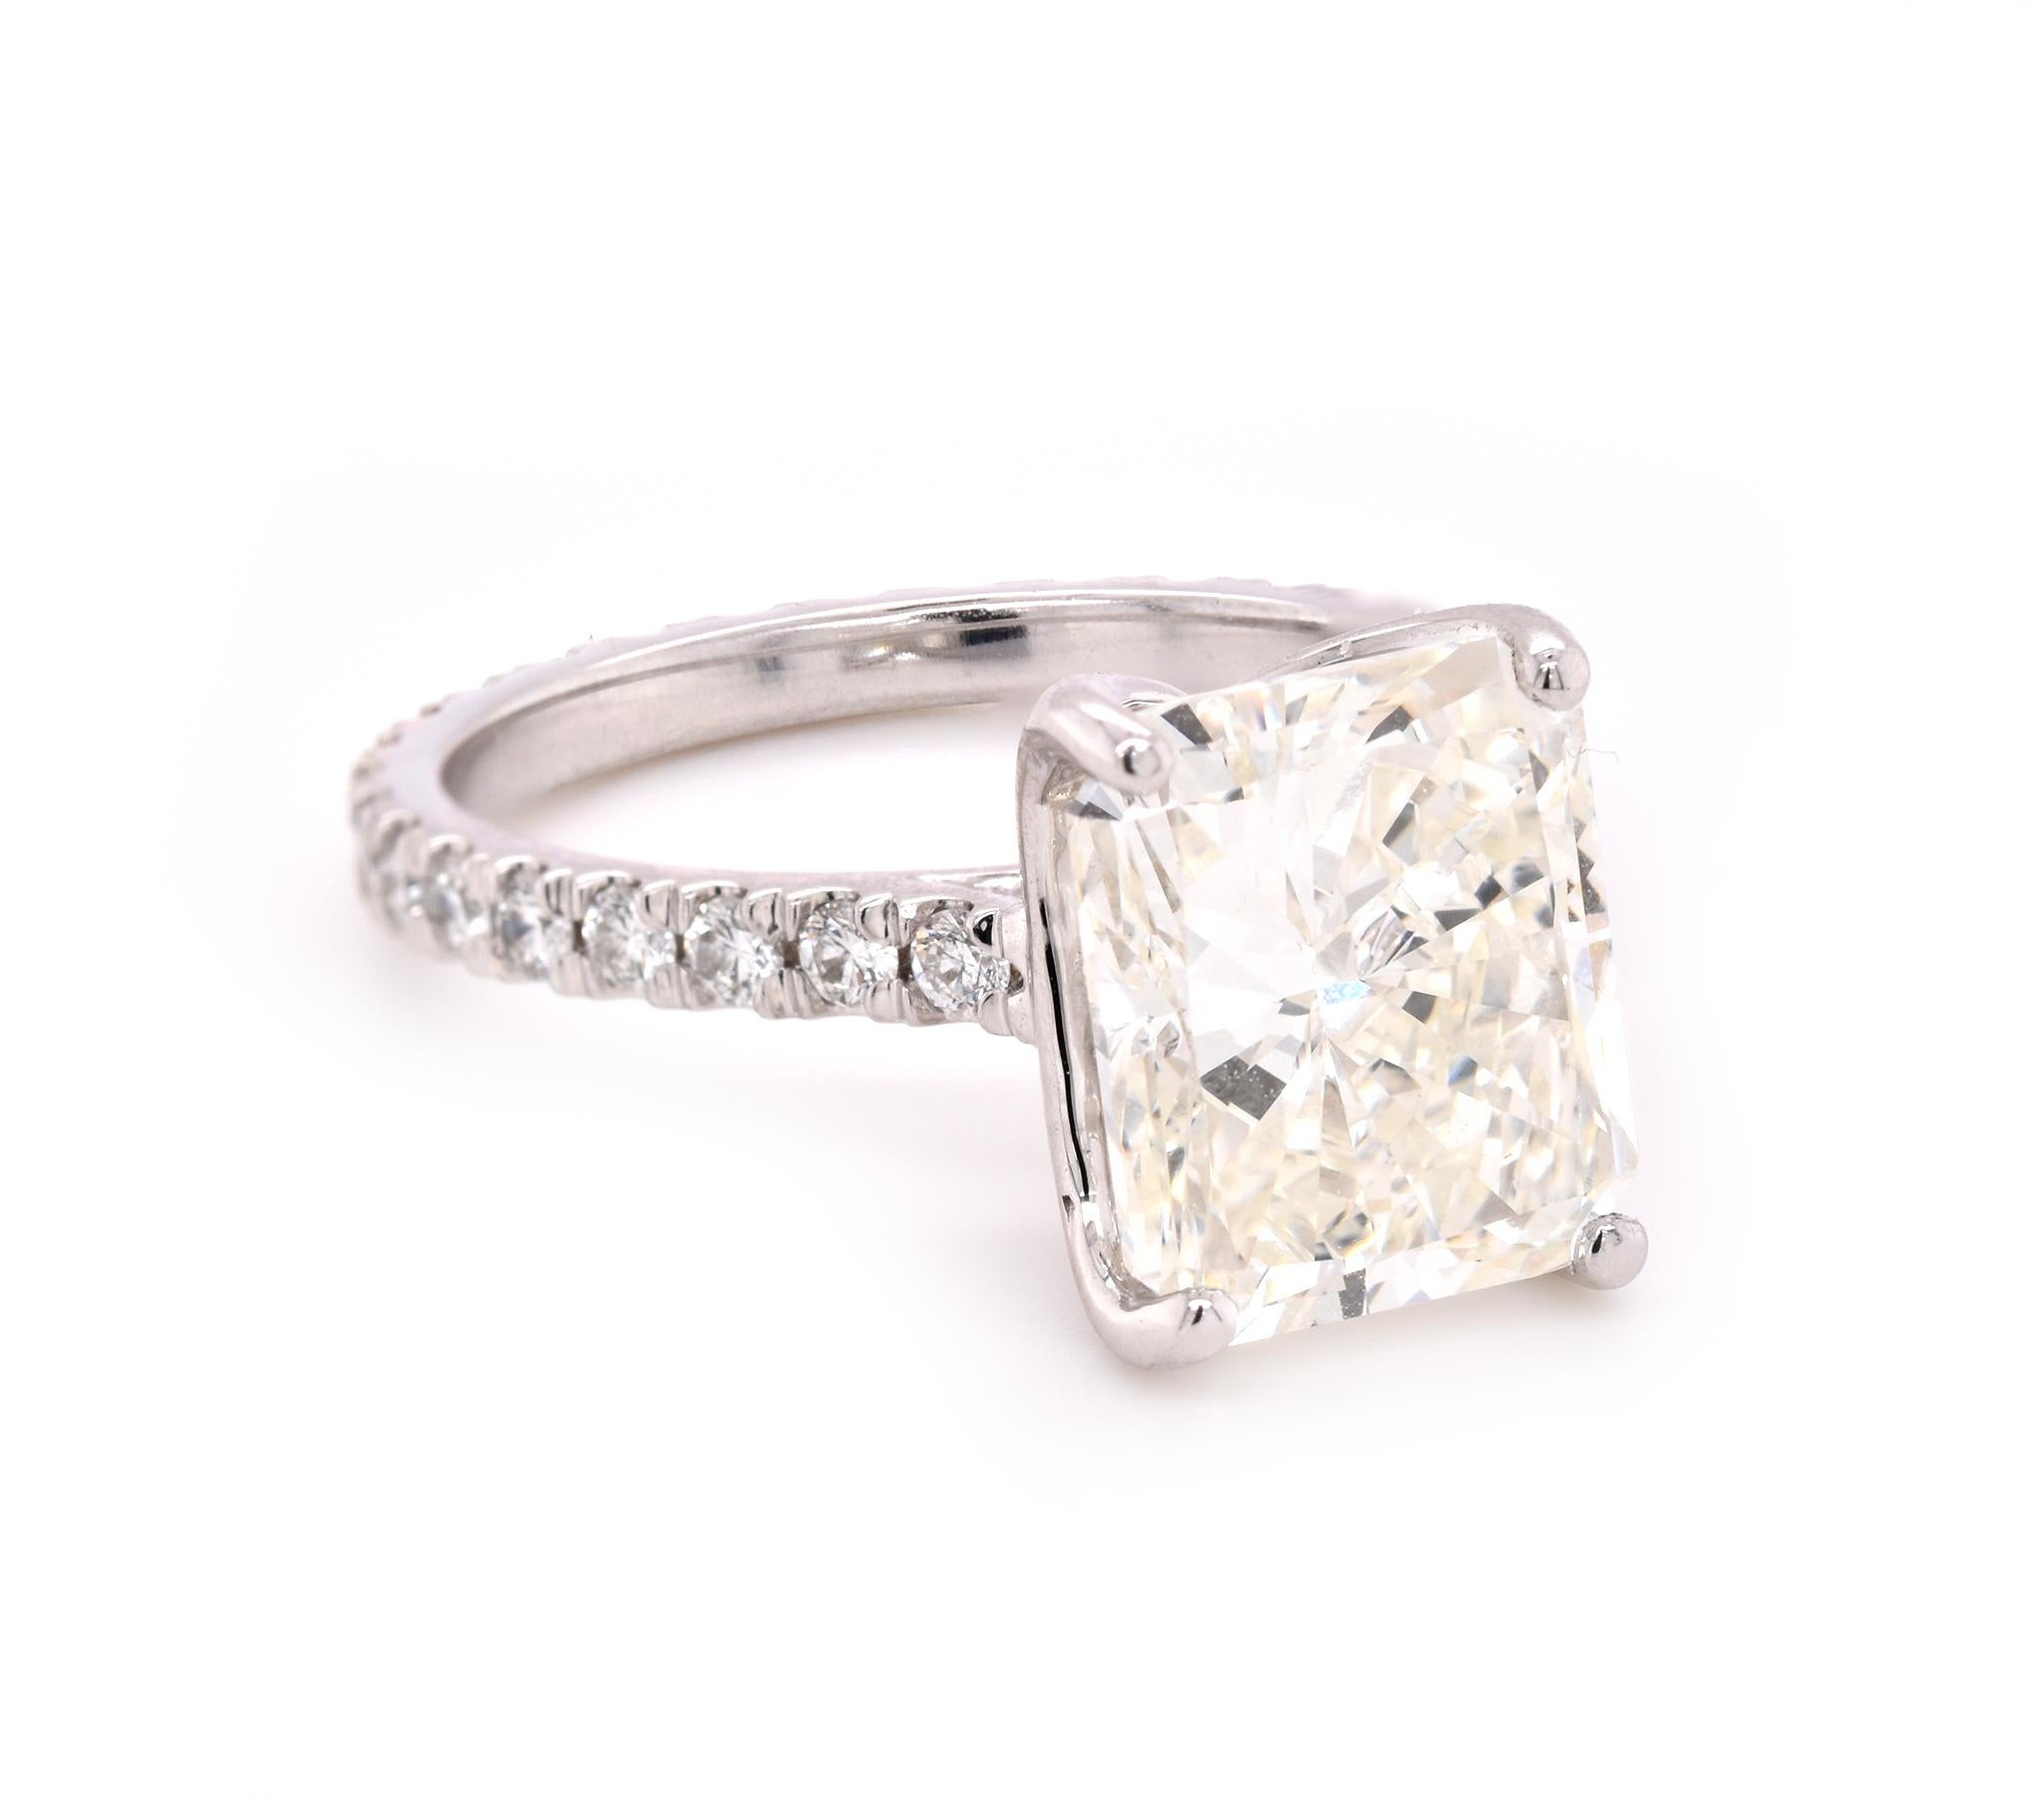 Material: 18k white gold
Center Diamond: 1 radiant cut = 4.41ct
Color: J
Clarity: VS2
GIA Cert#: 11048933
Diamonds: 29 Round brilliant cuts = 0.58cttw
Color: G
Clarity: VS
Ring Size: 7  (please allow up to 2 additional business days for sizing